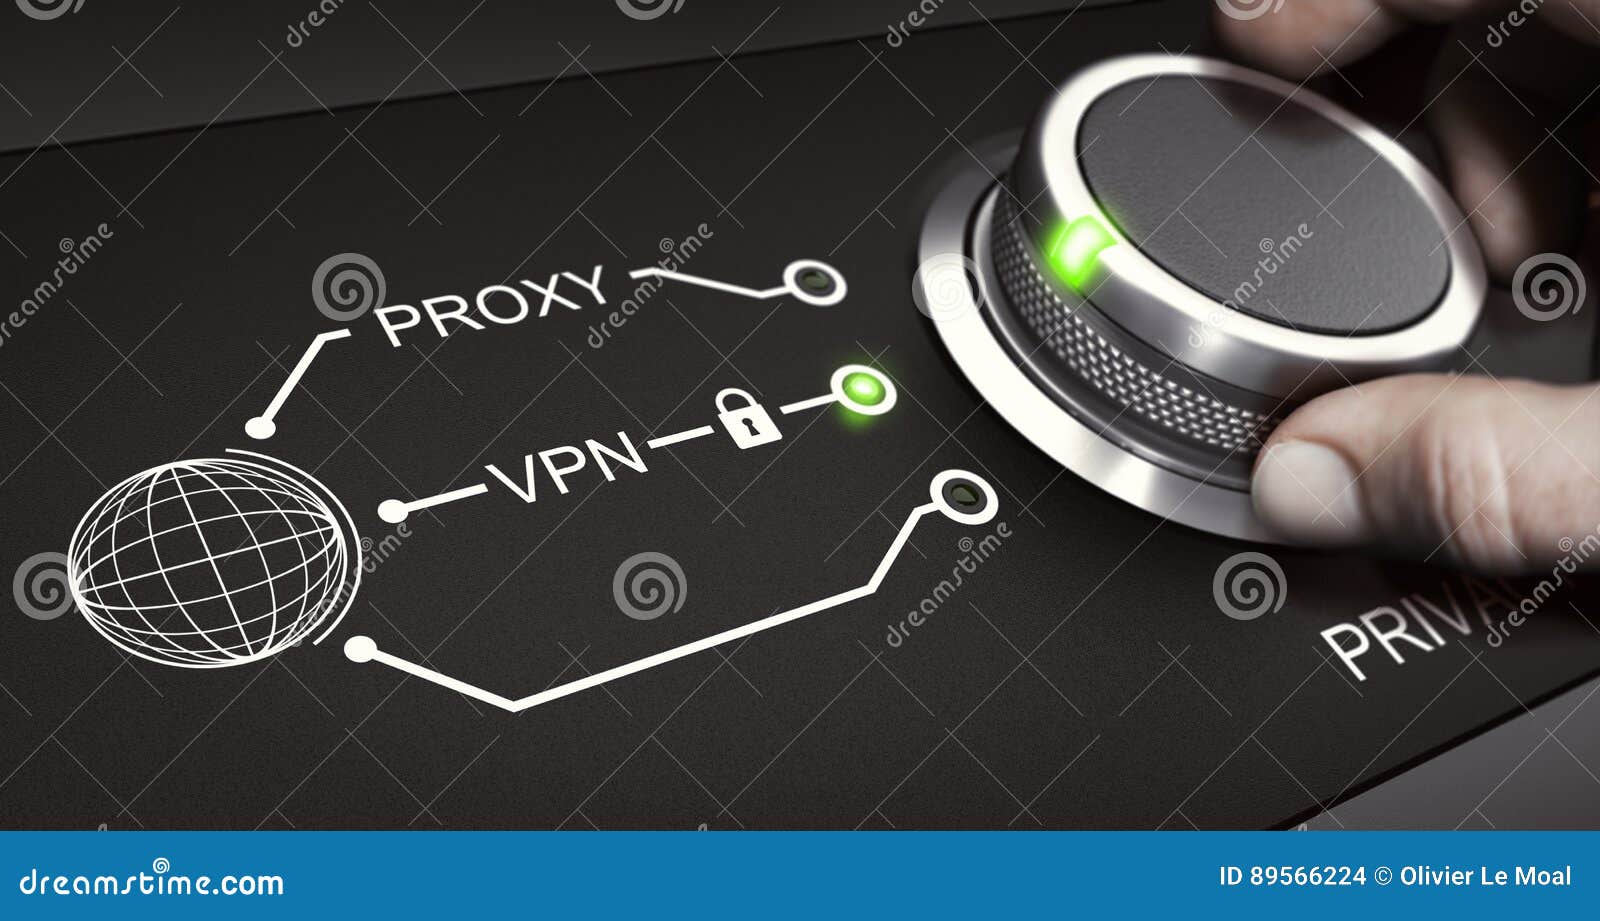 vpn, personal online security, virtual private network